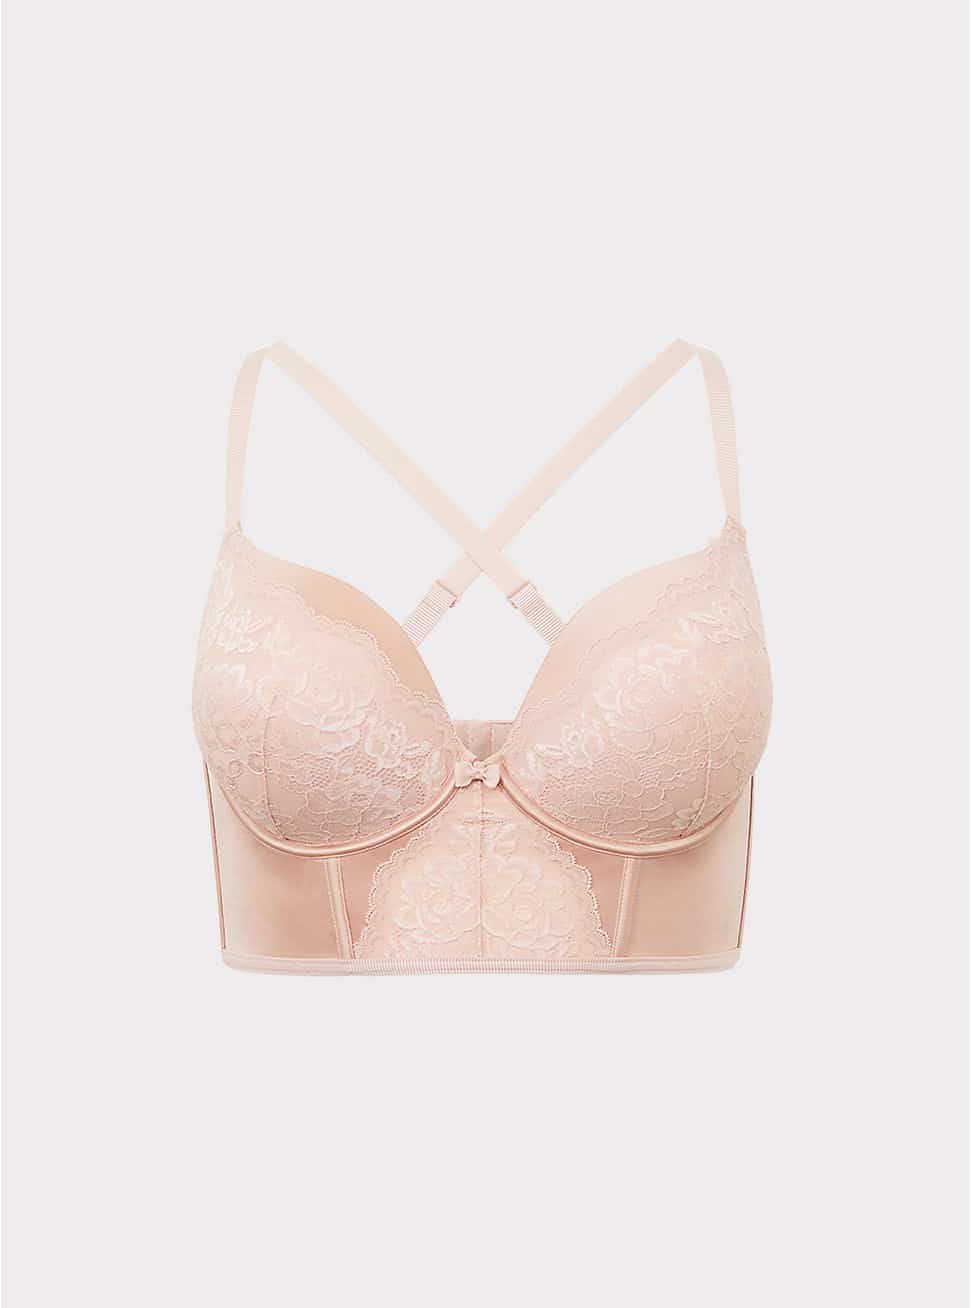 Ring the Alarm! 9 Super Sultry Bras For Curvy Ladies